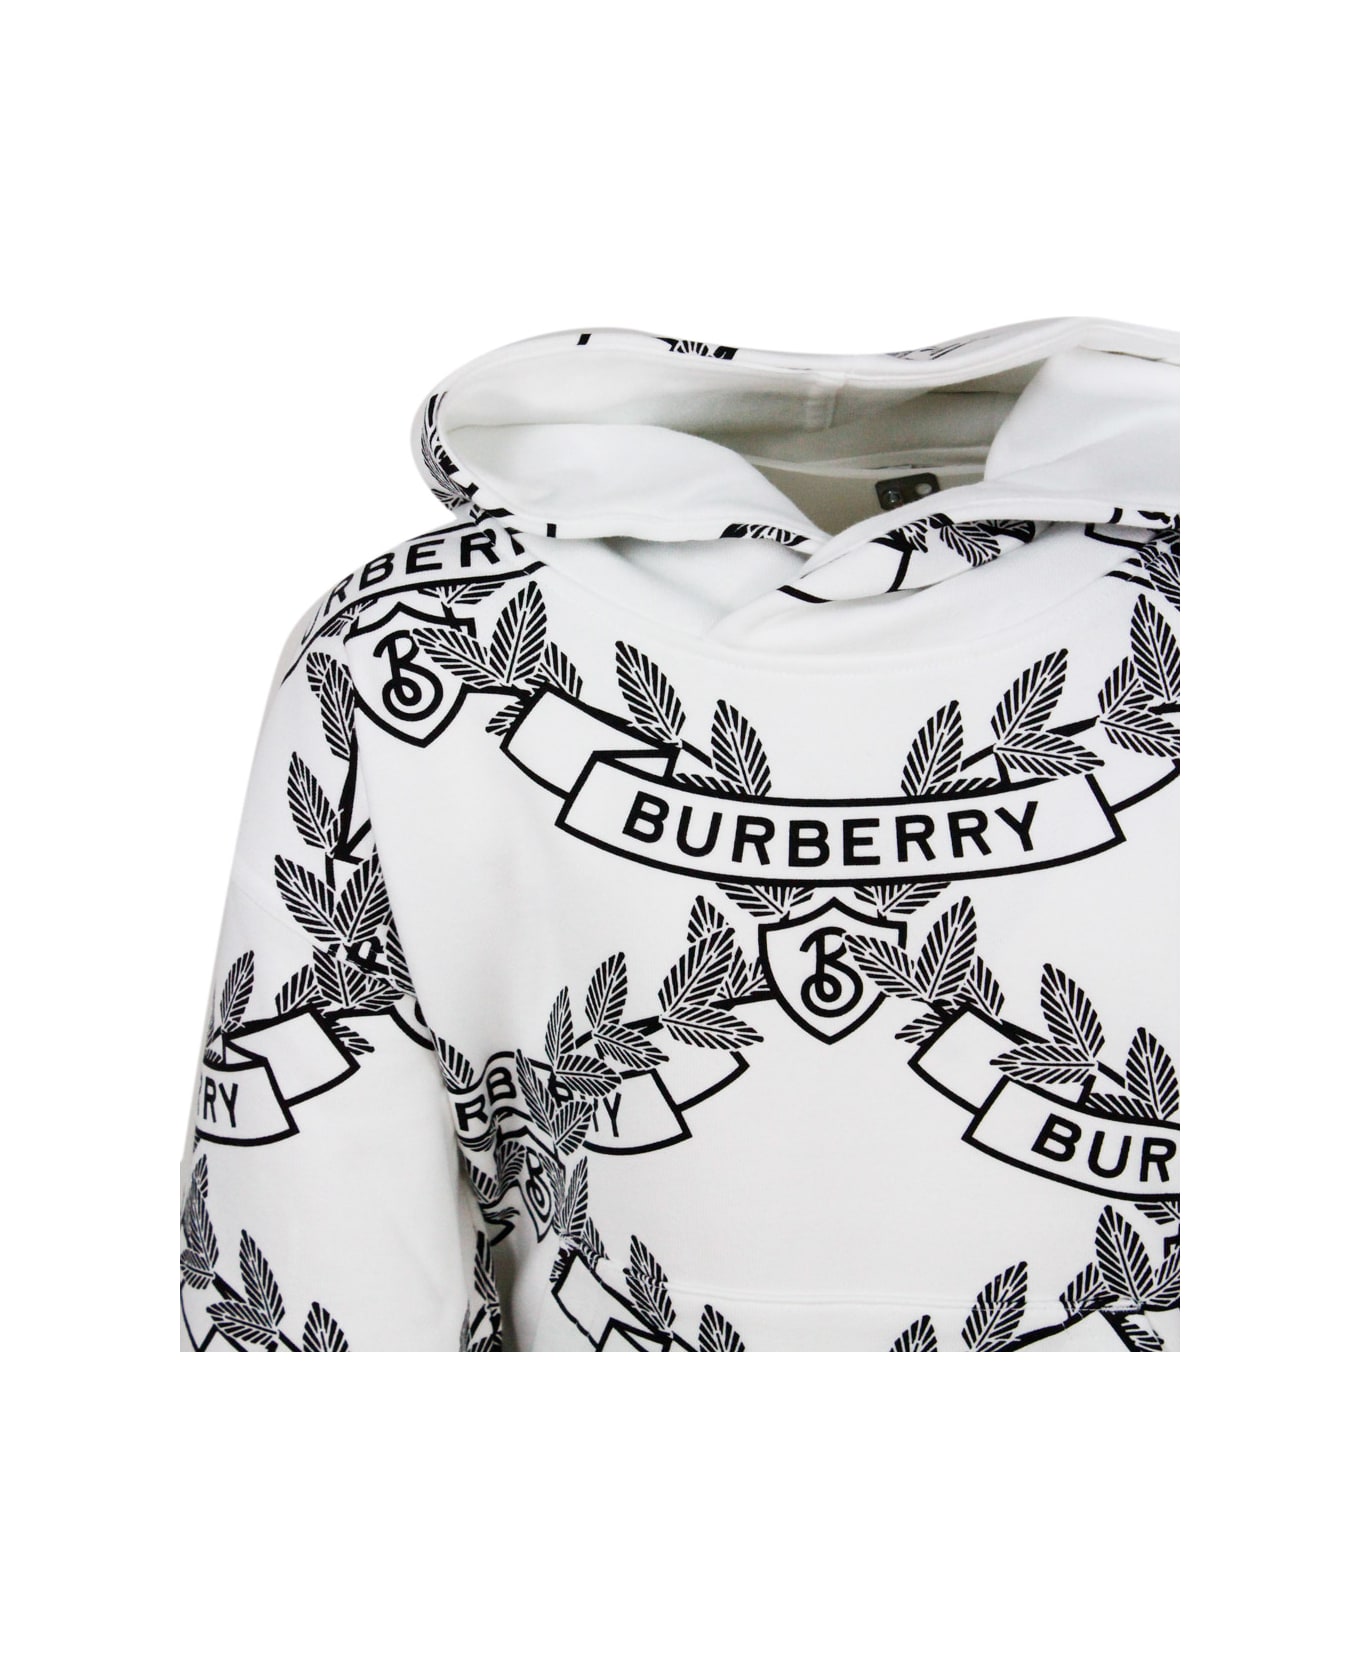 Burberry Rocky Crewneck Sweatshirt With Hood In Cotton Jersey With Logo Lettering Prints - White